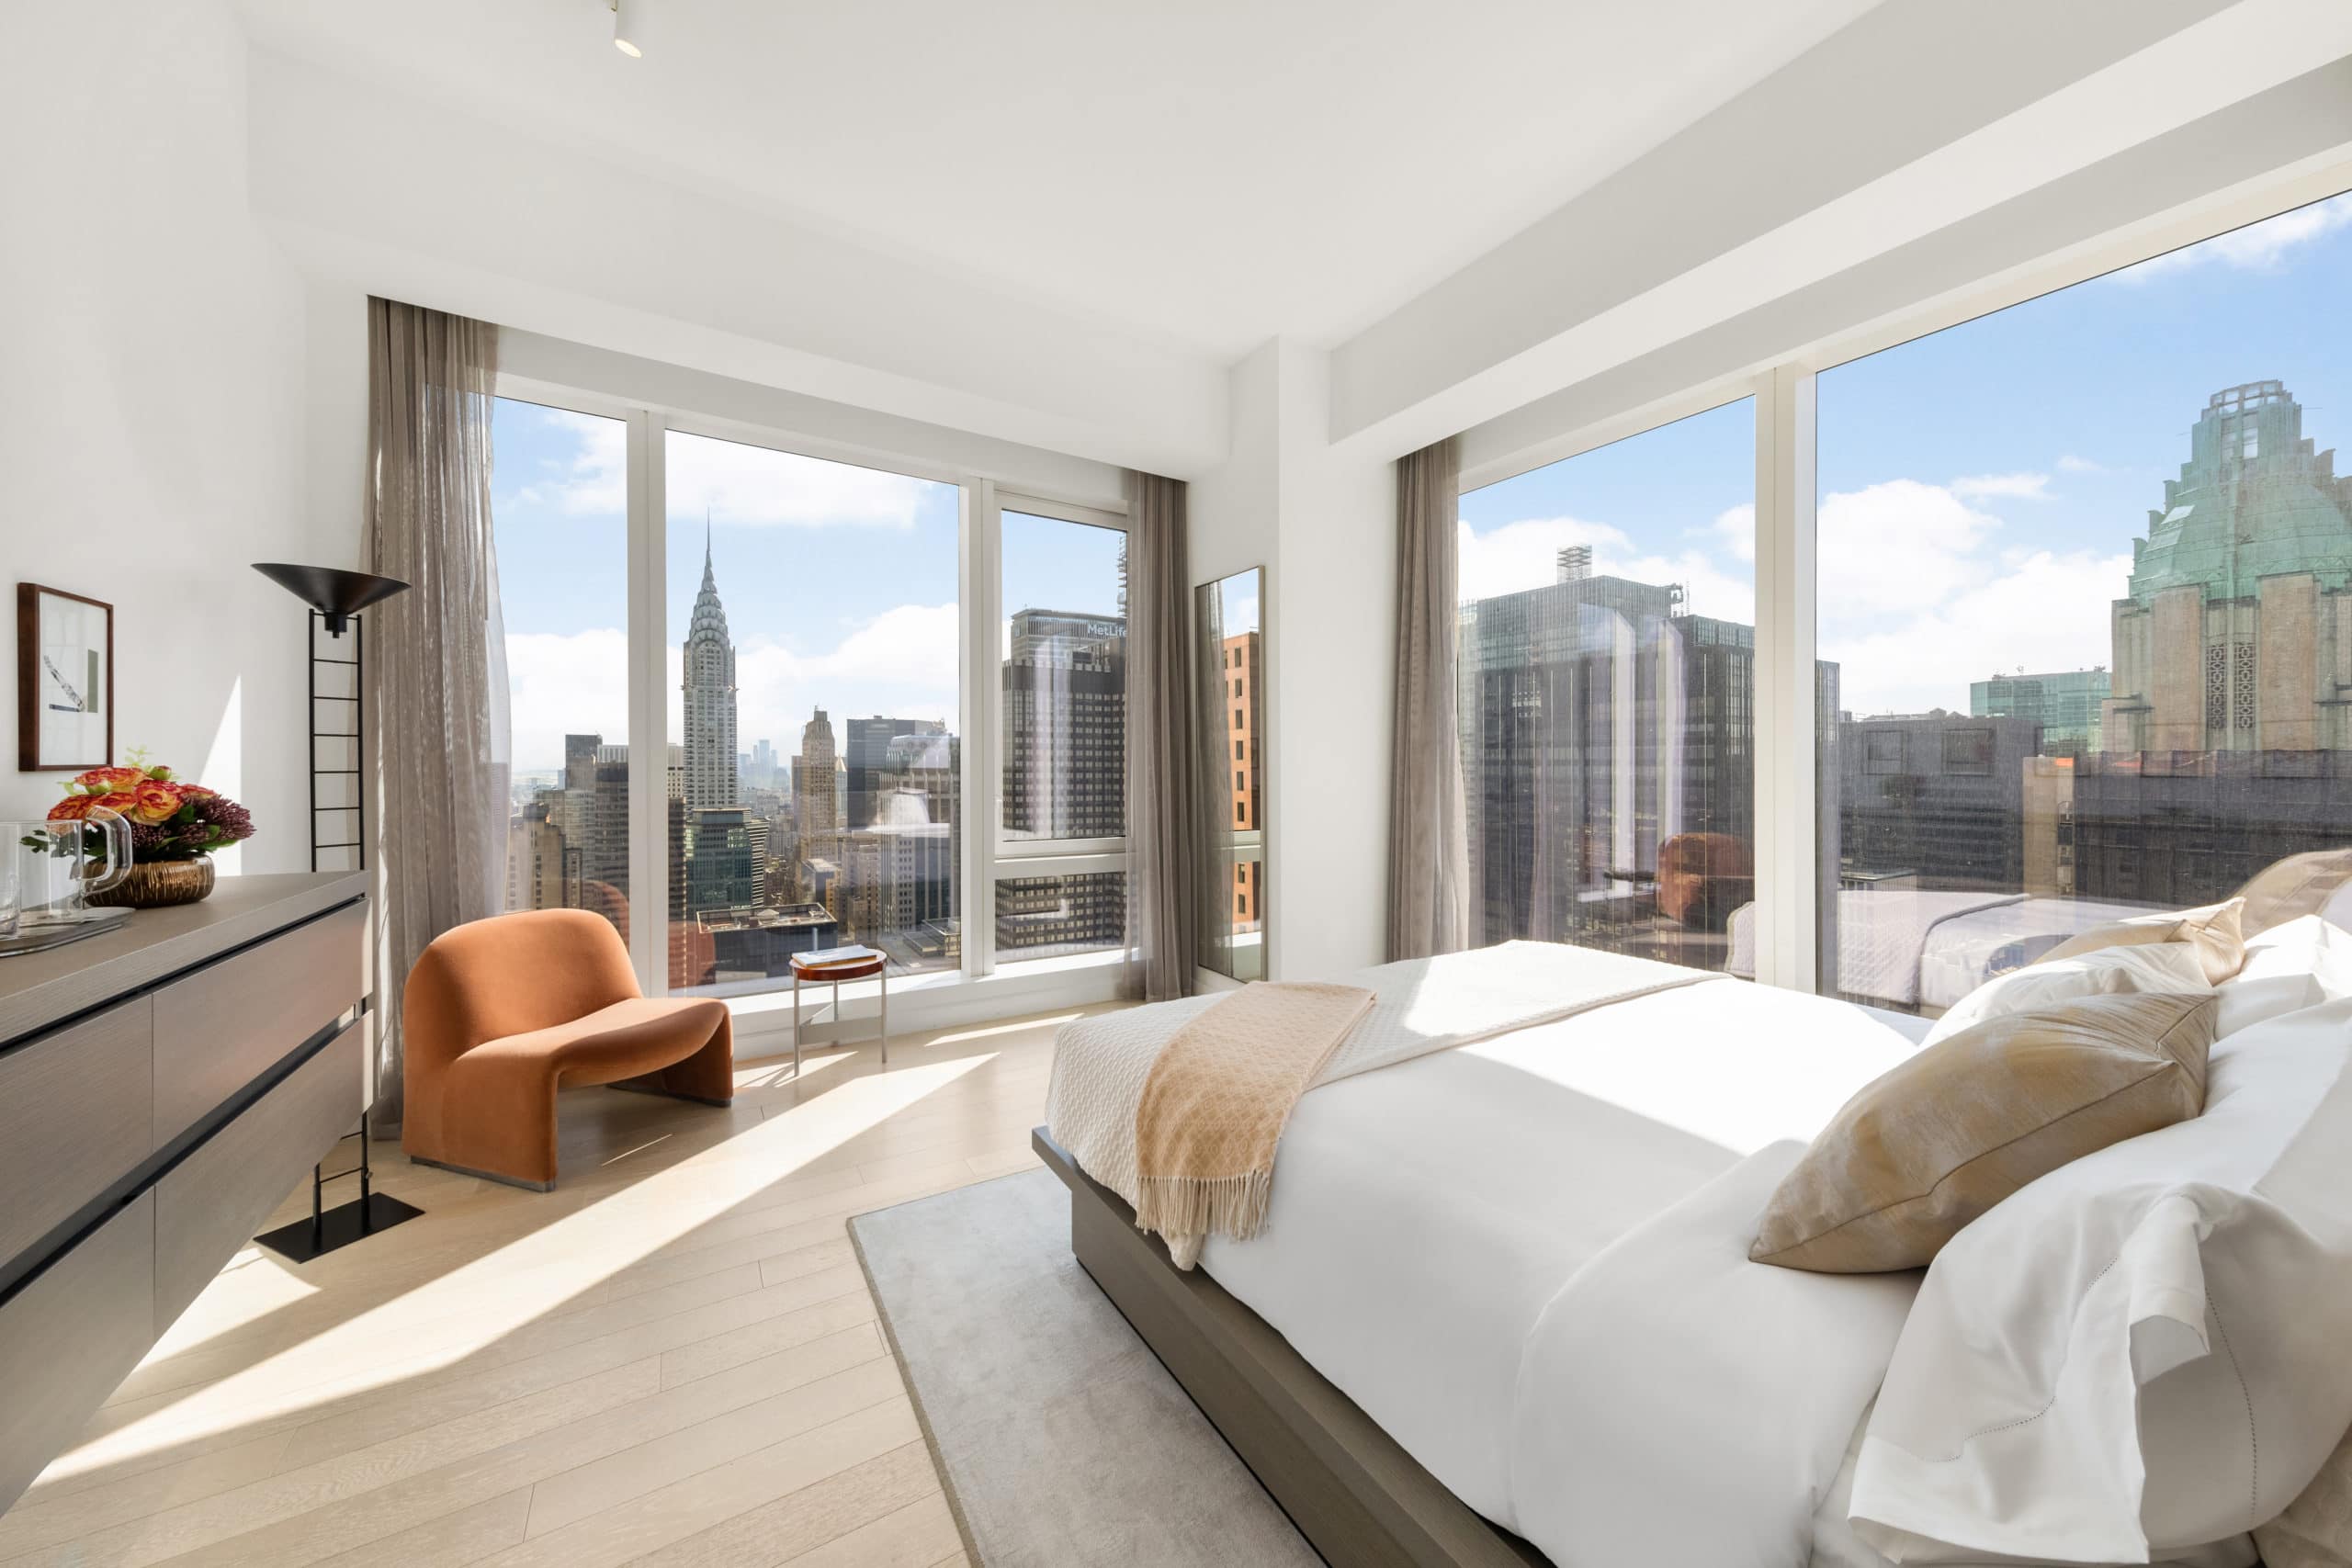 Bedroom at The Centrale condos in New York City. Corner bedroom with a bed, dresser, and large windows with city views.